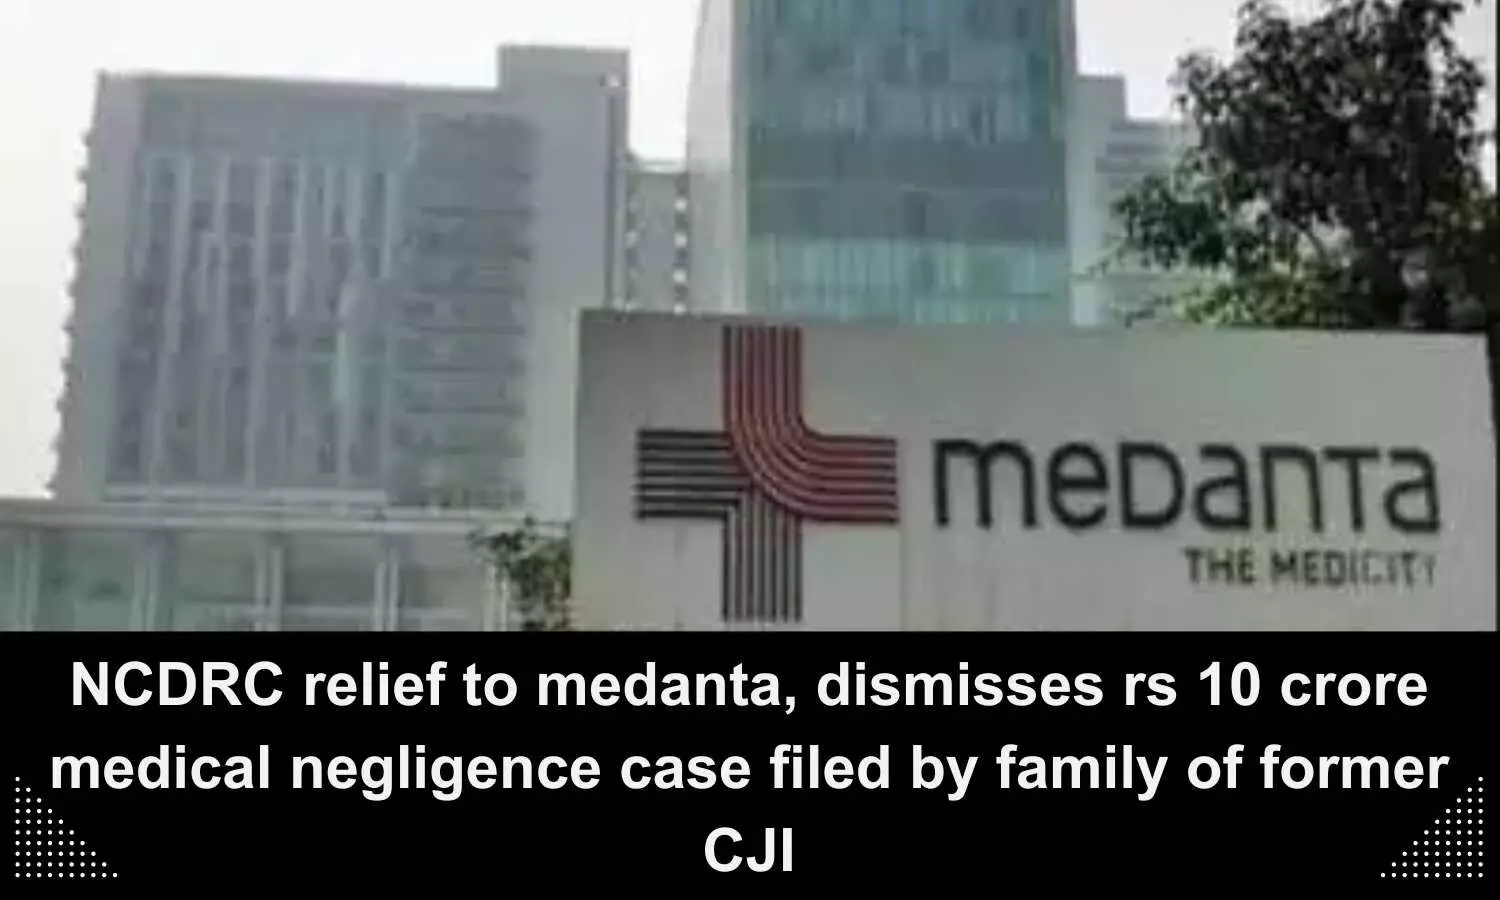 Relief to Medanta, NCDRC dismisses Rs 10 crore medical negligence case filed by former CJI family